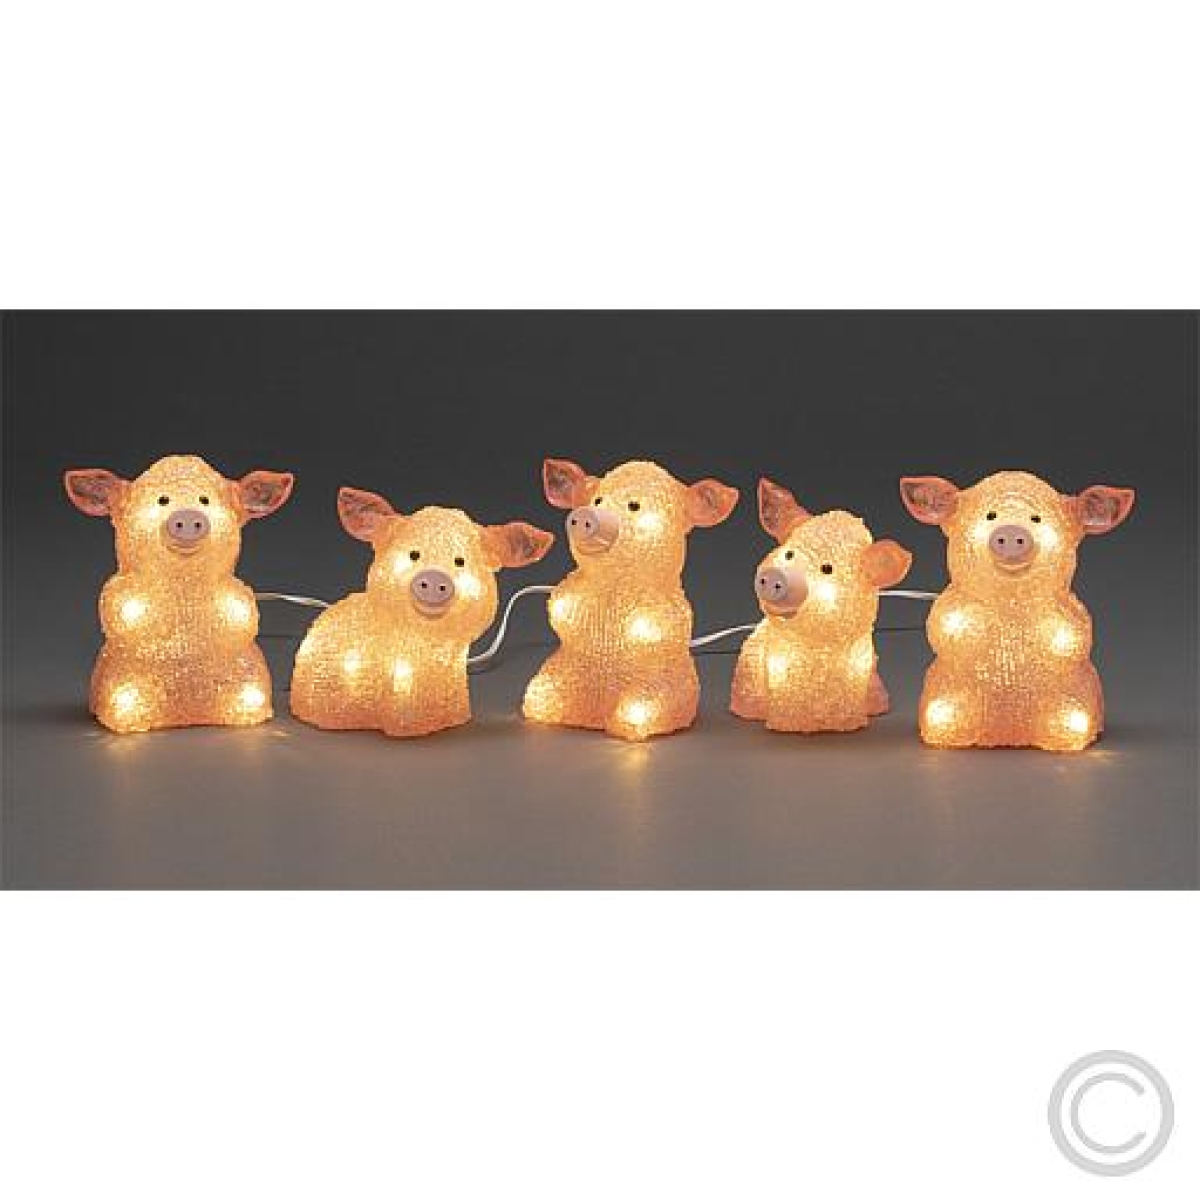 KonstsmideLED acrylic pigs inside and outside 5x8 LEDs warm white 10.5x12.5cm 6232-343Article-No: 831765